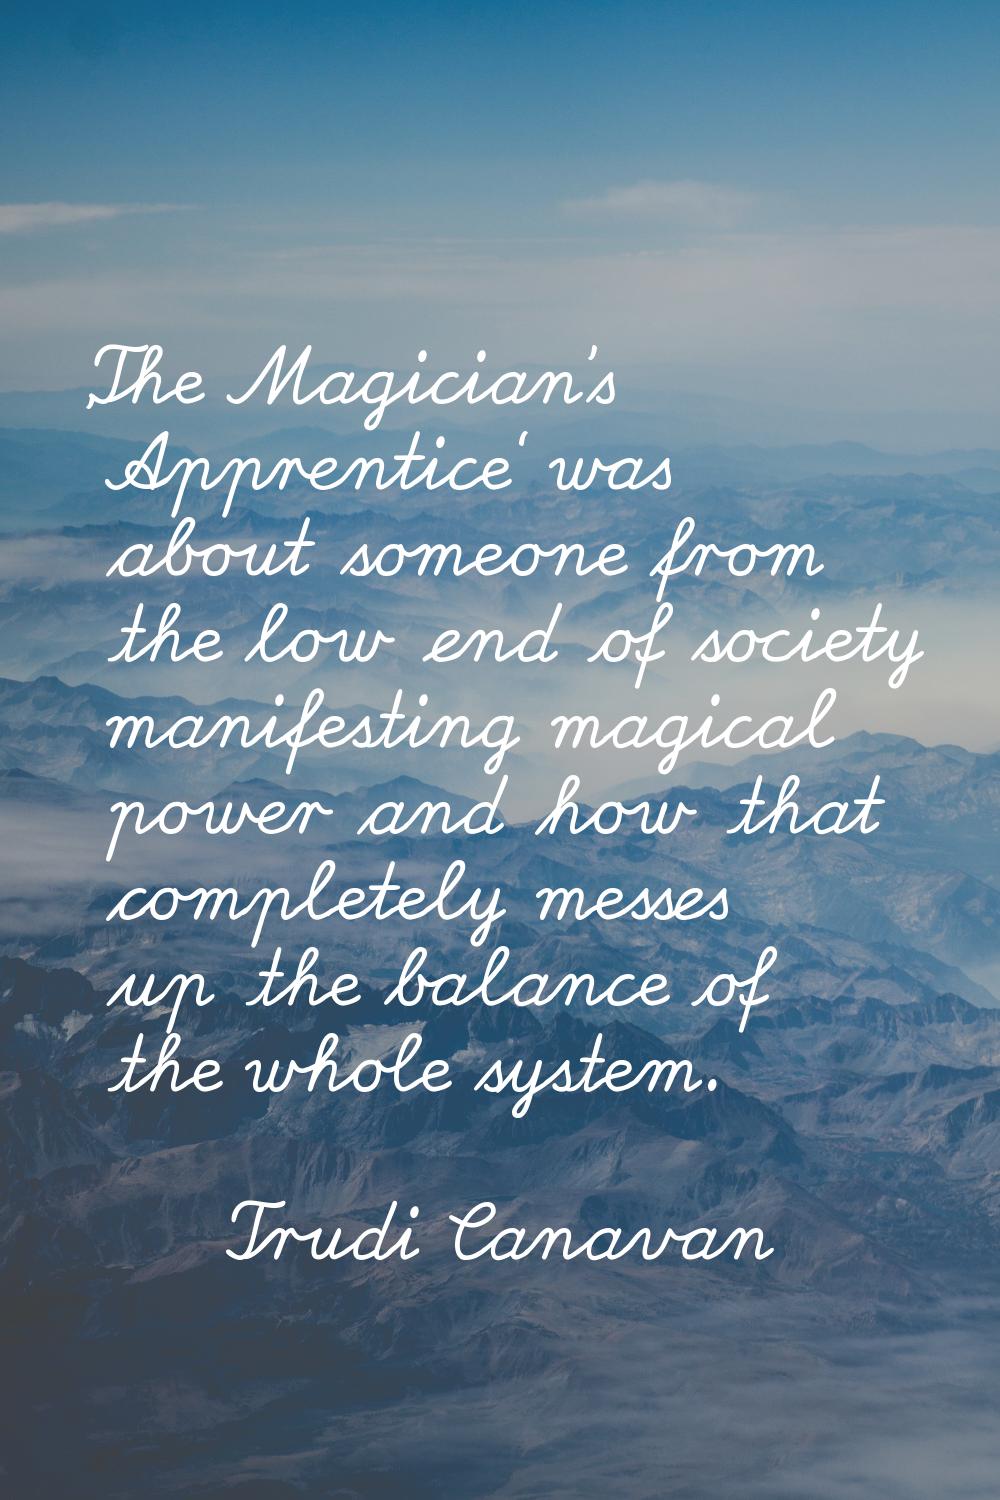 'The Magician's Apprentice' was about someone from the low end of society manifesting magical power